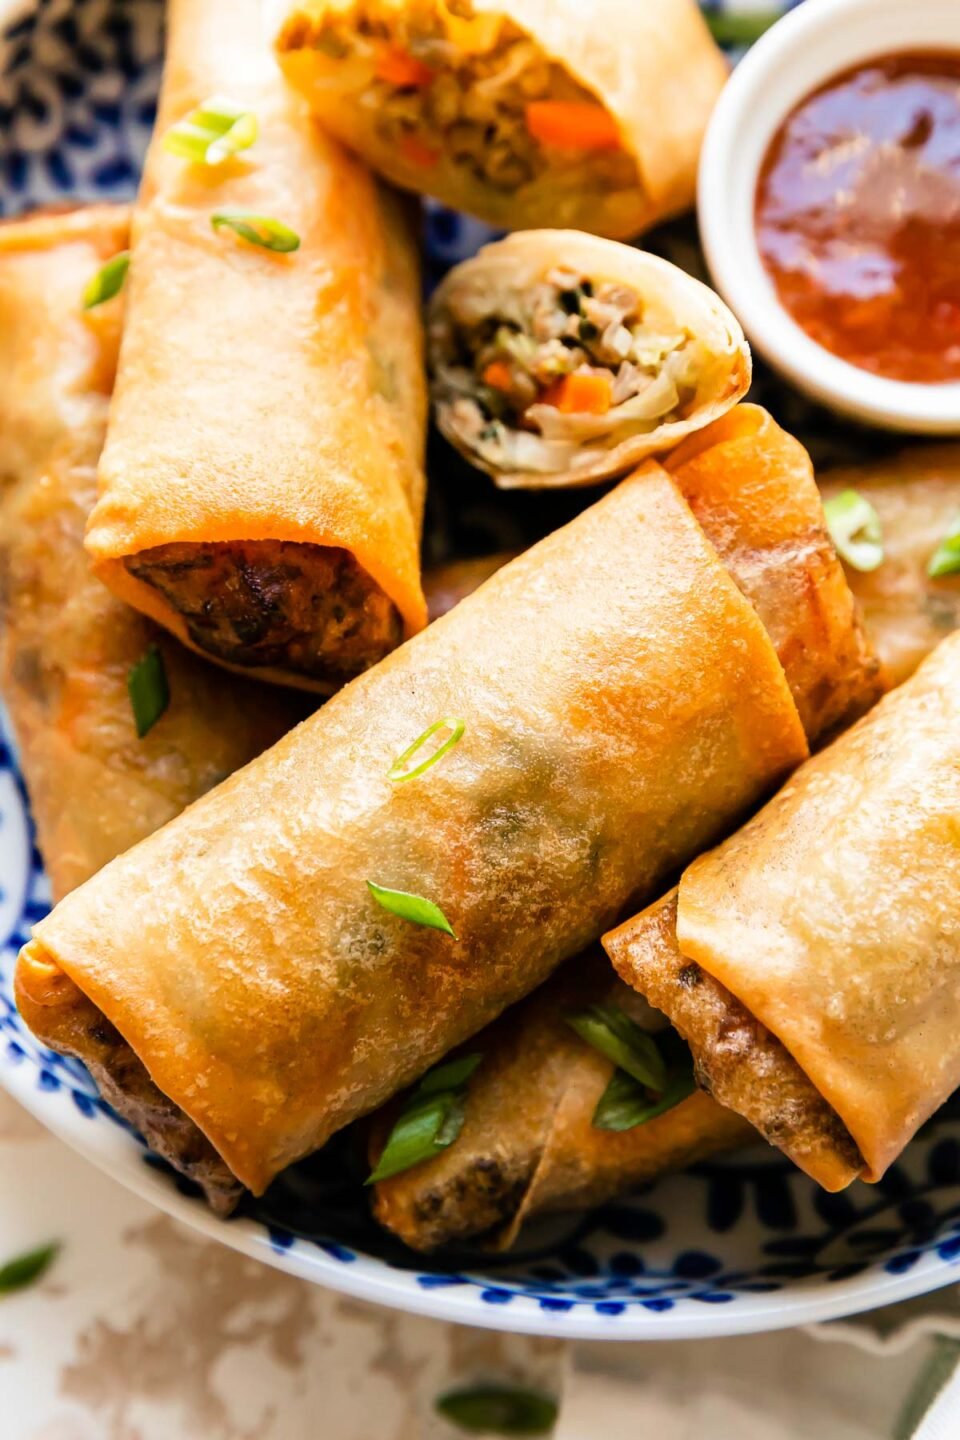 A close up and macro shot of pork egg rolls served inside of a blue and white floral patterned bowl that sits atop a creamy white textured surface. A small white bowl filled with duck sauce rests inside of the bowl. The homemade egg rolls are garnished with sliced green onions and a white linen napkin rests alongside the bowl.